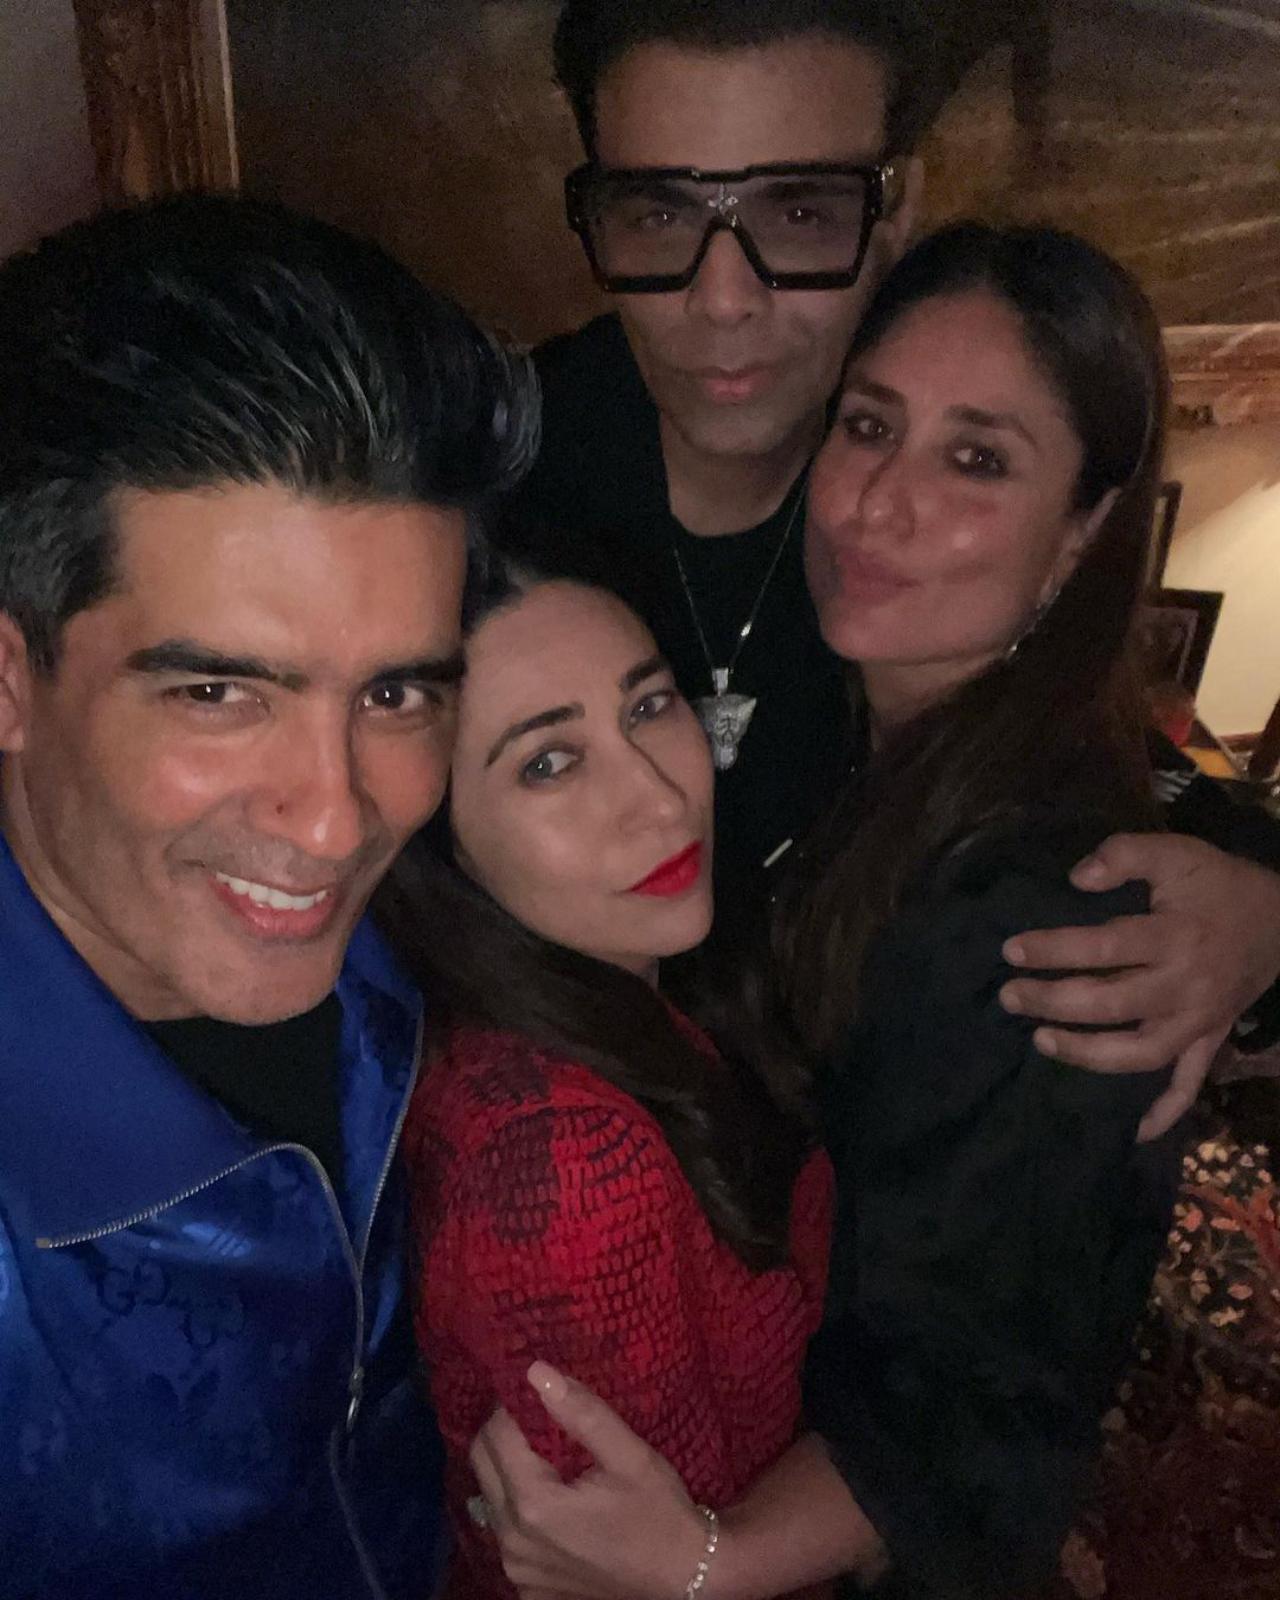 Manish also shared a picture where he is seen posing with Kareena along with Karisma Kapoor and Karan Johar